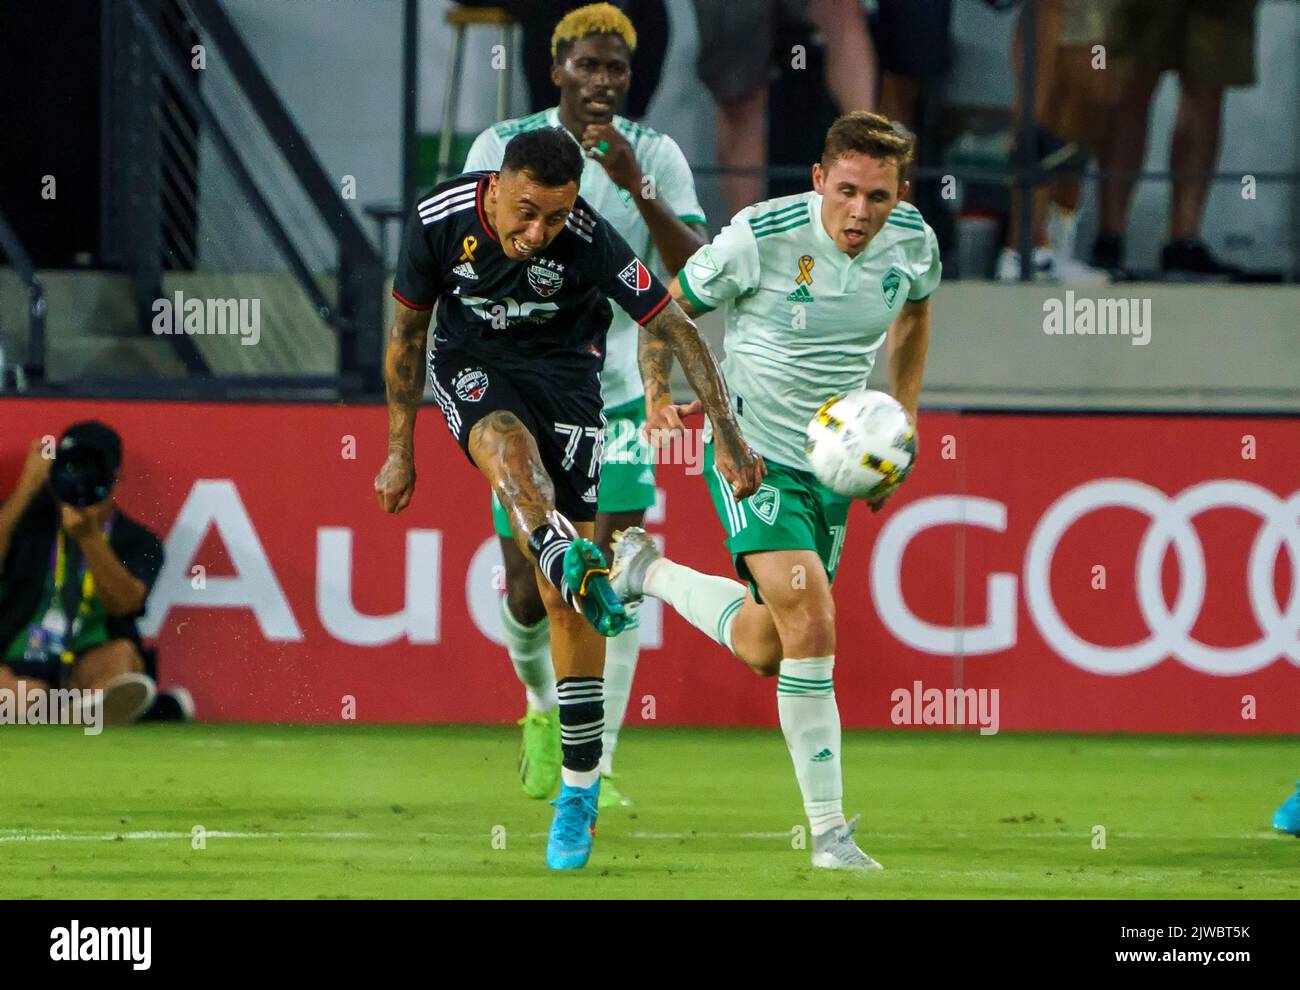 WASHINGTON, DC, USA - 4 SEPTEMBER 2022: D.C. United forward Martin Rodriguez (77) boots the ball away from Colorado Rapids midfielder Philip Mayaka (16) during a MLS match between D.C United and the Colorado Rapids, on September 04, 2022, at Audi Field, in Washington, DC. (Photo by Tony Quinn-Alamy Live News) Stock Photo